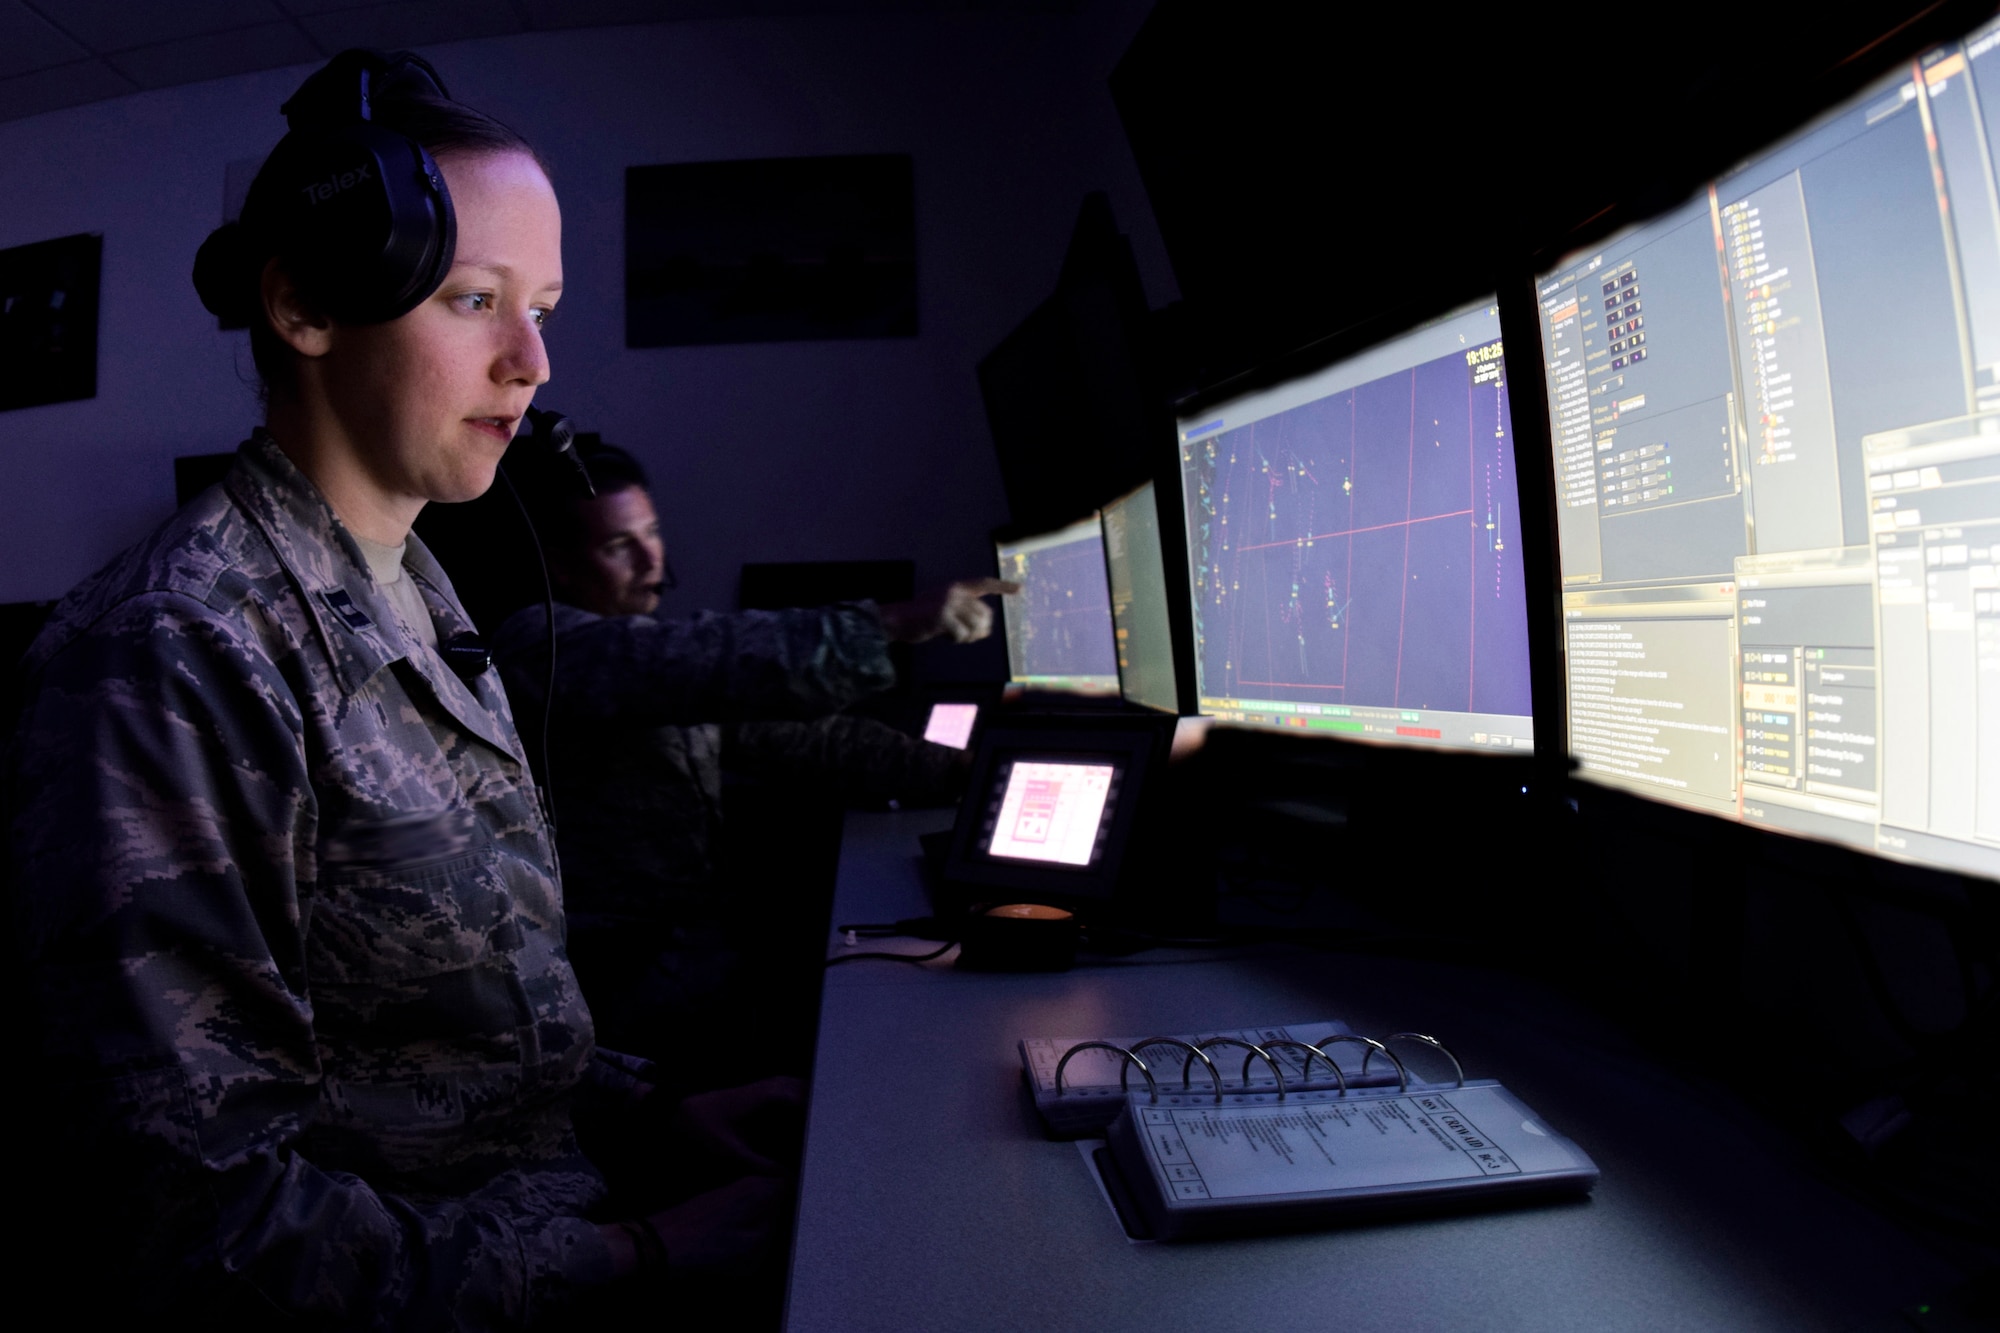 The faces of Capt. Jennifer and Maj. Michael (last names not used in accordance with Air Combat Command directives), 752nd Operation Support Squadron air battle managers, are illuminated by the glow of their computer screens as they follow and point out target aircraft during a training scenario on the AN/TYQ-23A emulator Oct. 31, 2016, Tinker Air Force Base, Okla. The trainees are working as part of a larger crew to test the communication and decision making skills of the individuals and team under a stressful environment. (Photos taken of systems configured to unclassified status by subject matter experts. Photo has been manipulated to blur the names of individuals shown.)(U.S. Air Force photo/Greg L. Davis)